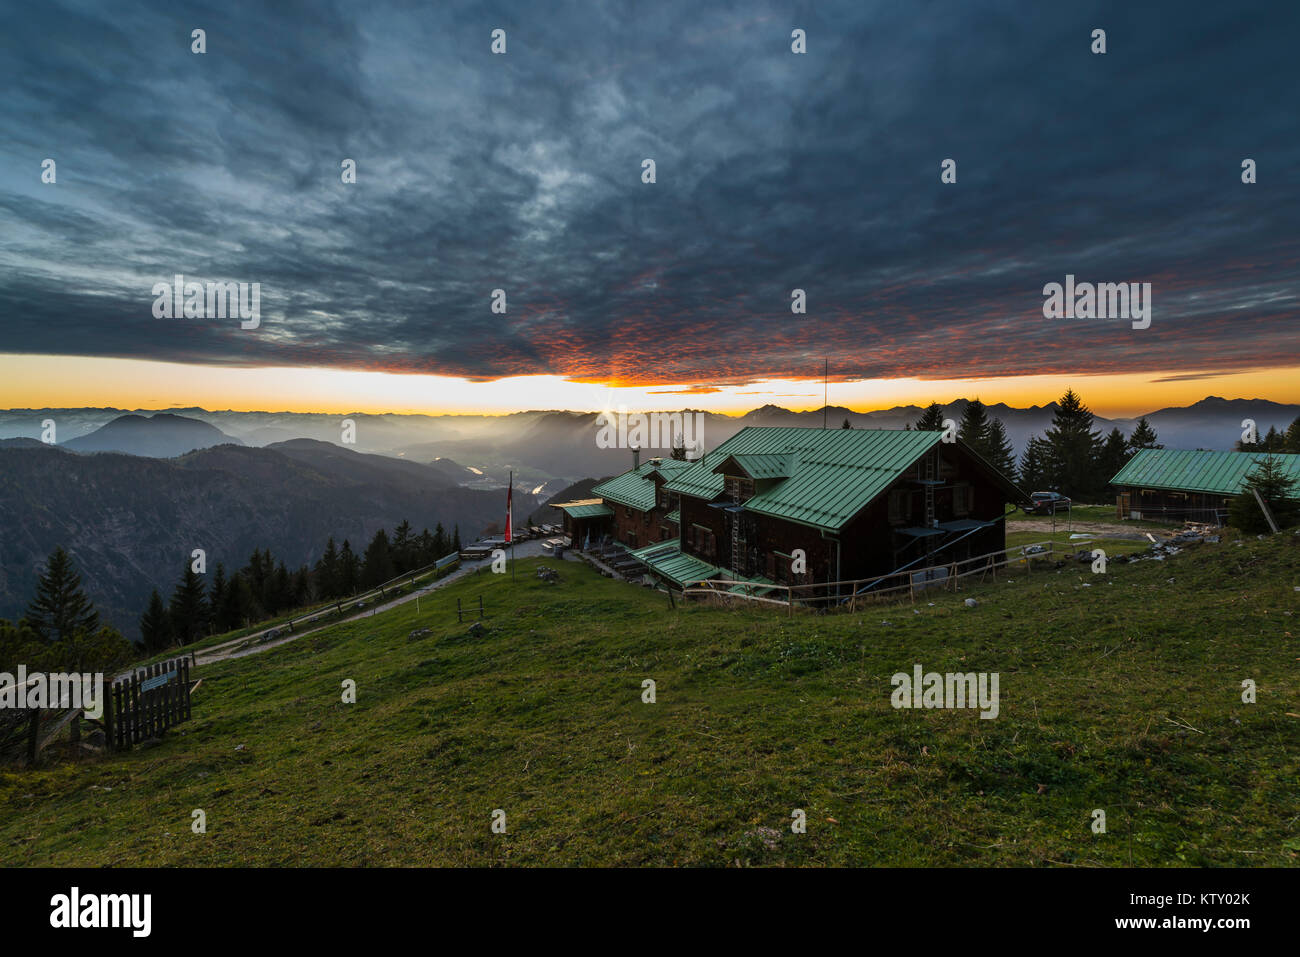 Sunset and glowing clouds with alpine panorama at the mountain hut Vorderkaiserfeldenhütte in the Kaiser Mountains above Inn valley, Tyrol, Austria Stock Photo